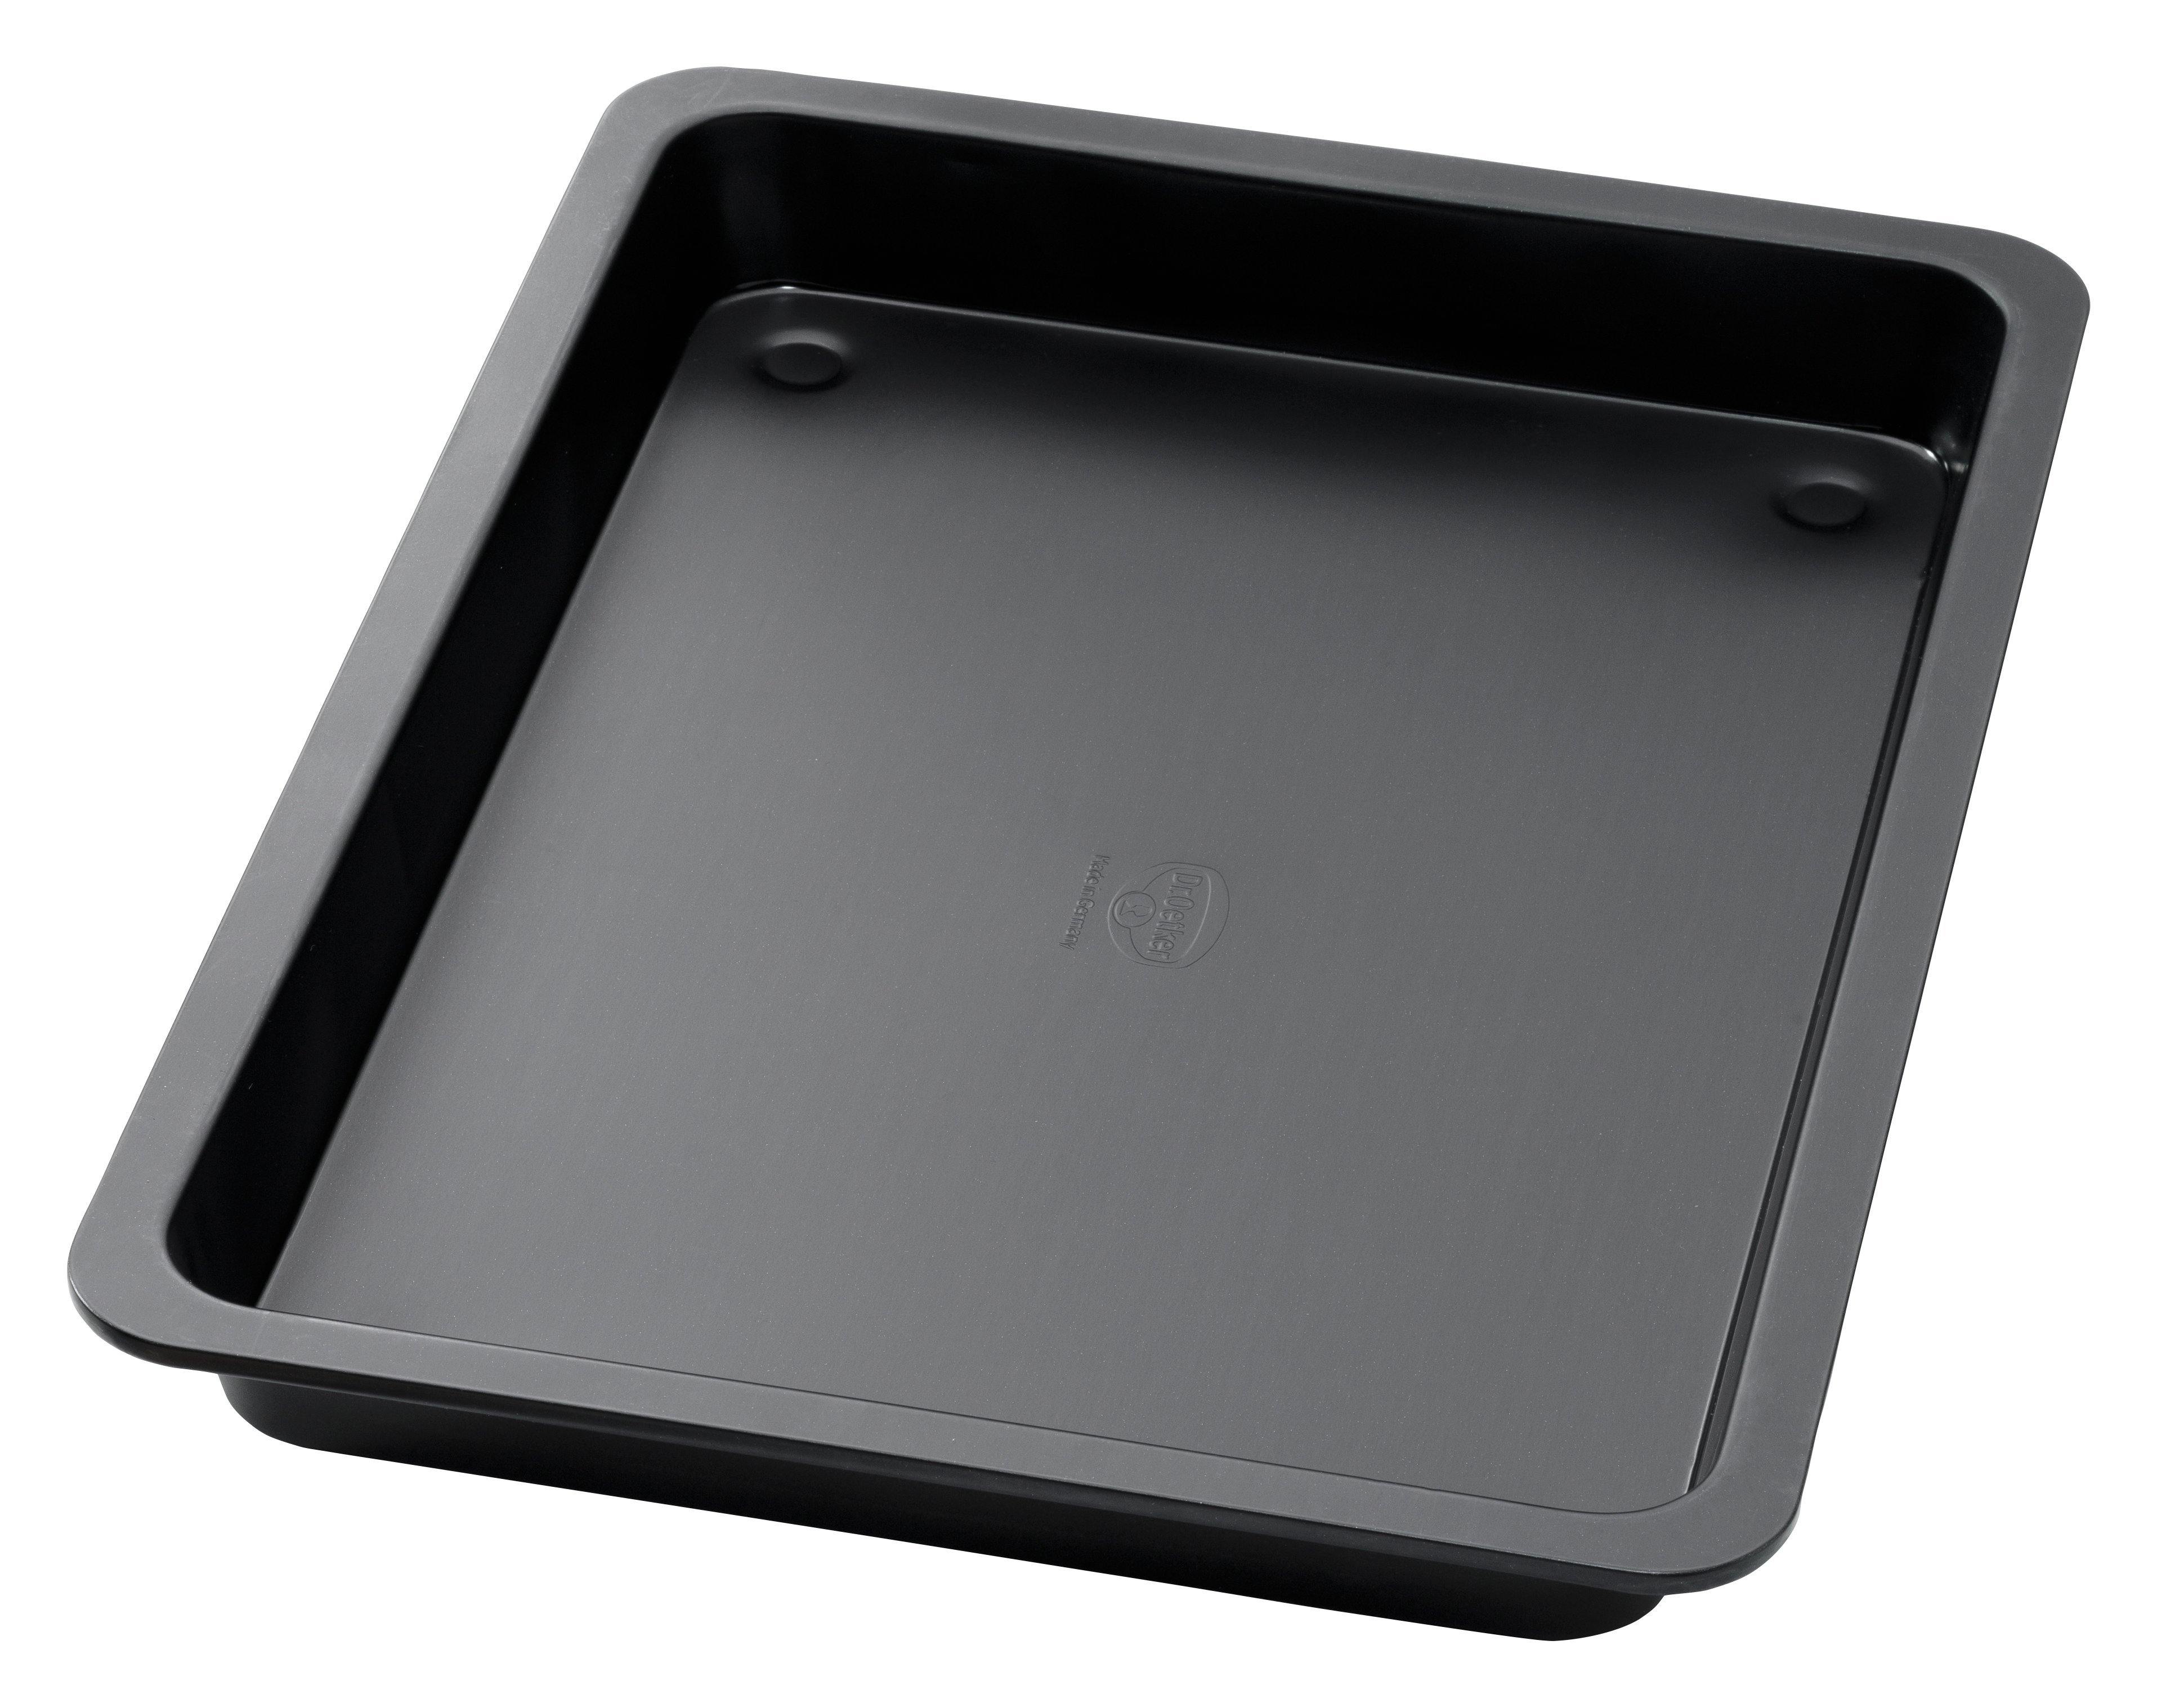 Dr. Oetker "Tradition" Baking Tray With Extra High Rim, Grey/Black, 42X29X4 Cm - Whole and All